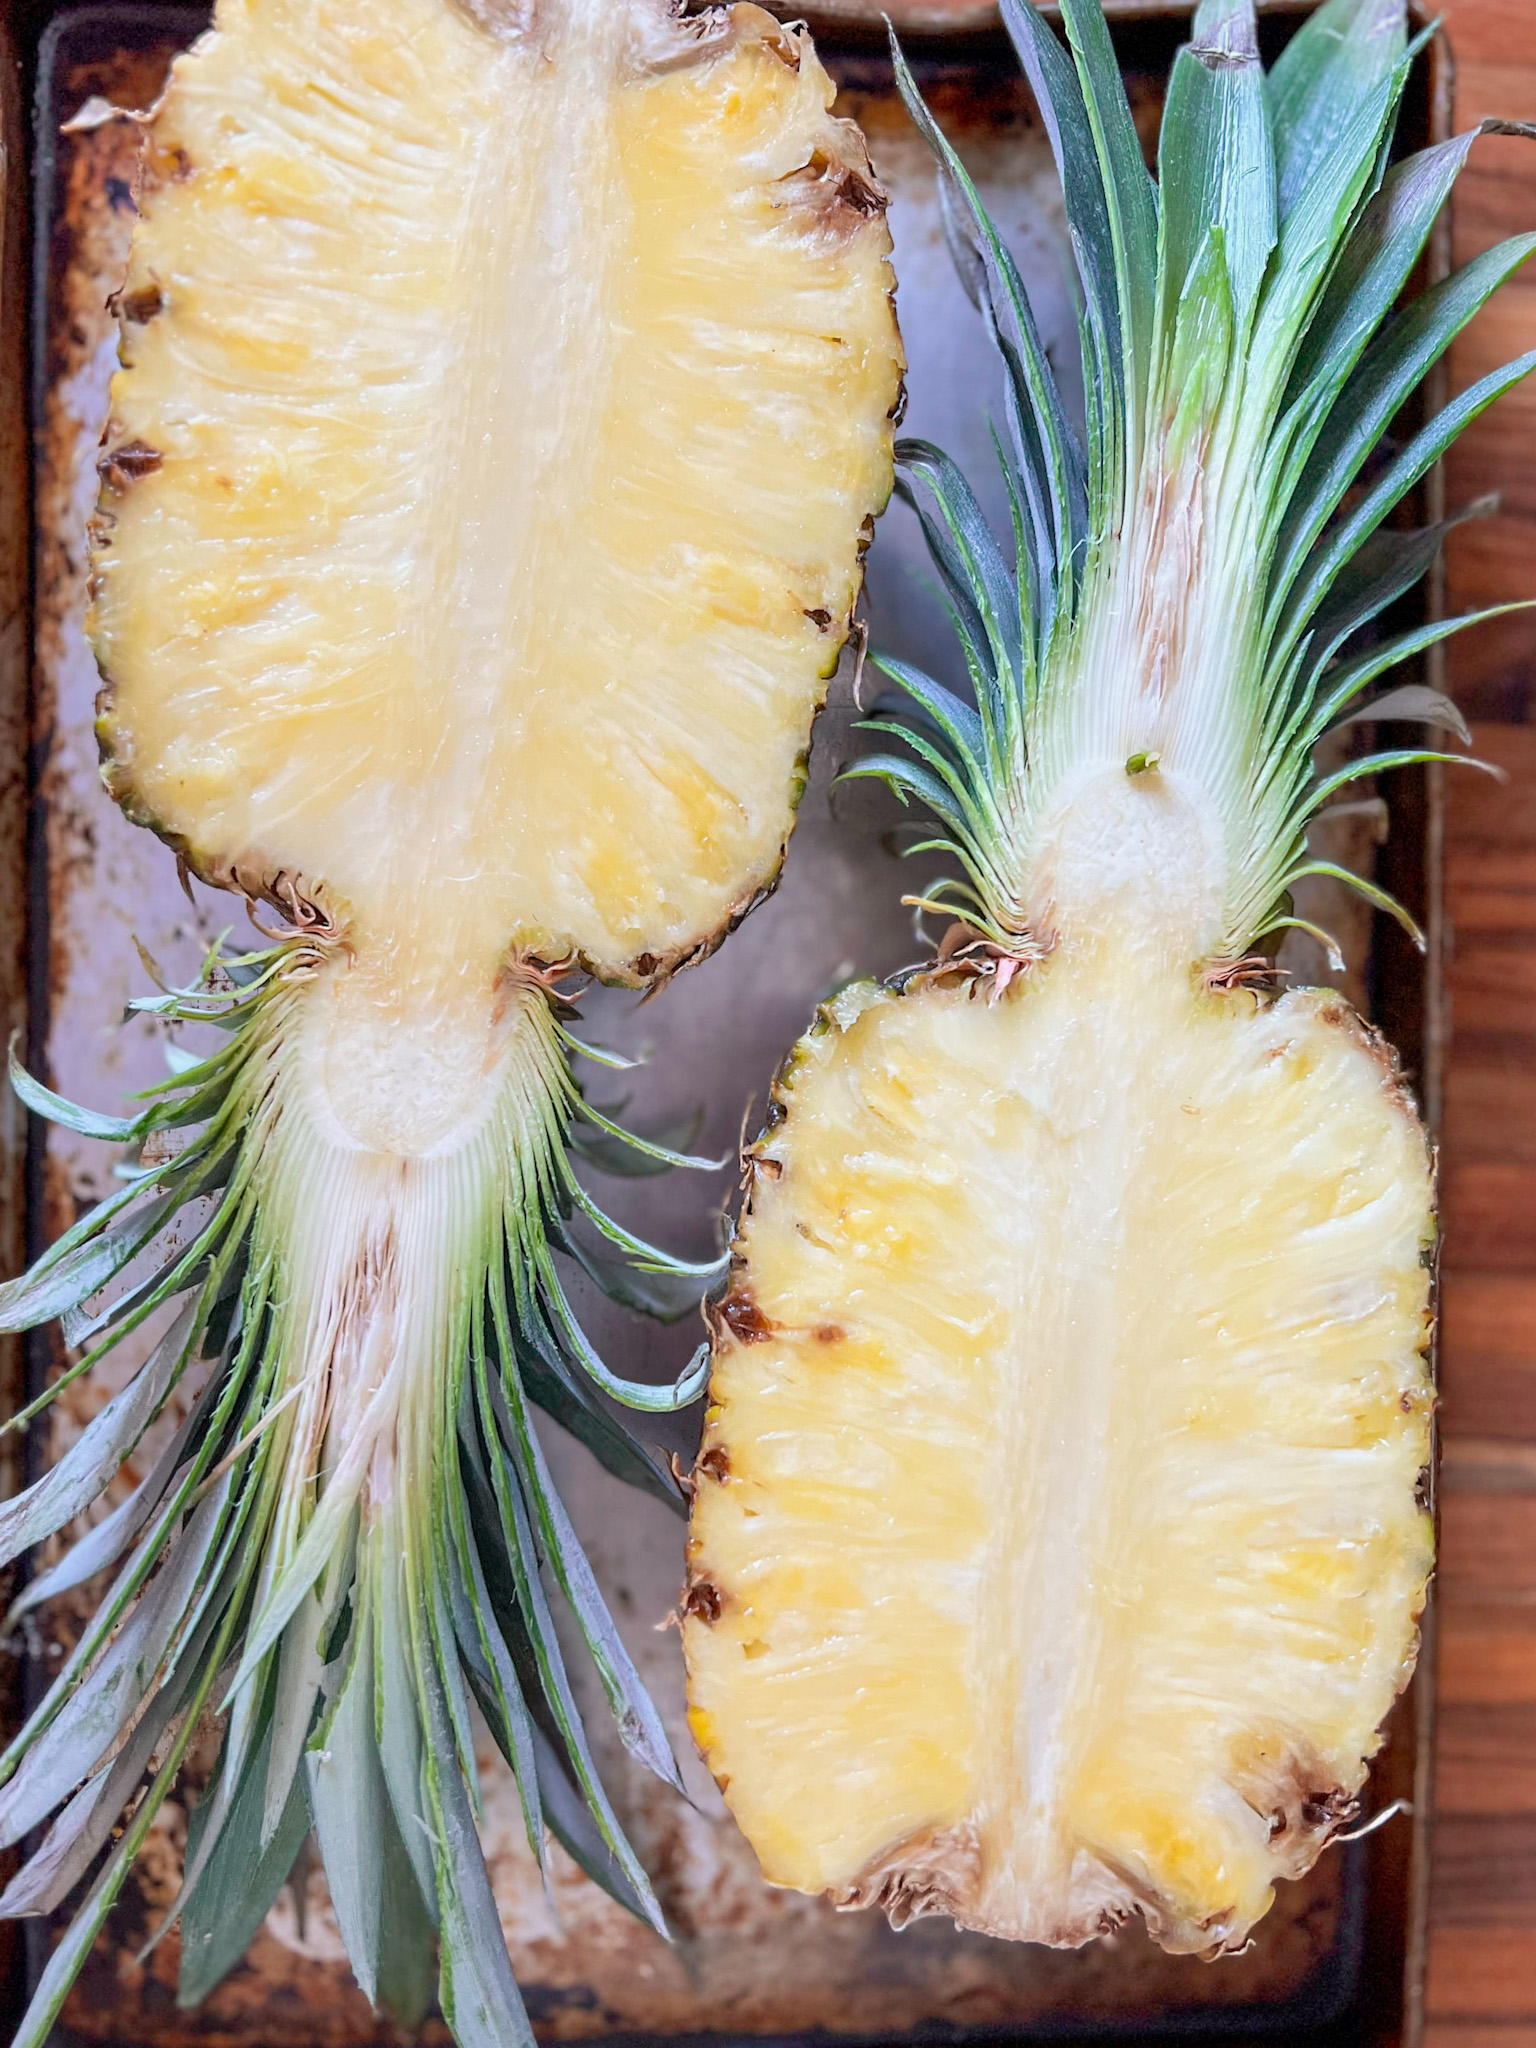 a whole pineapple sliced in half on a cooking sheet